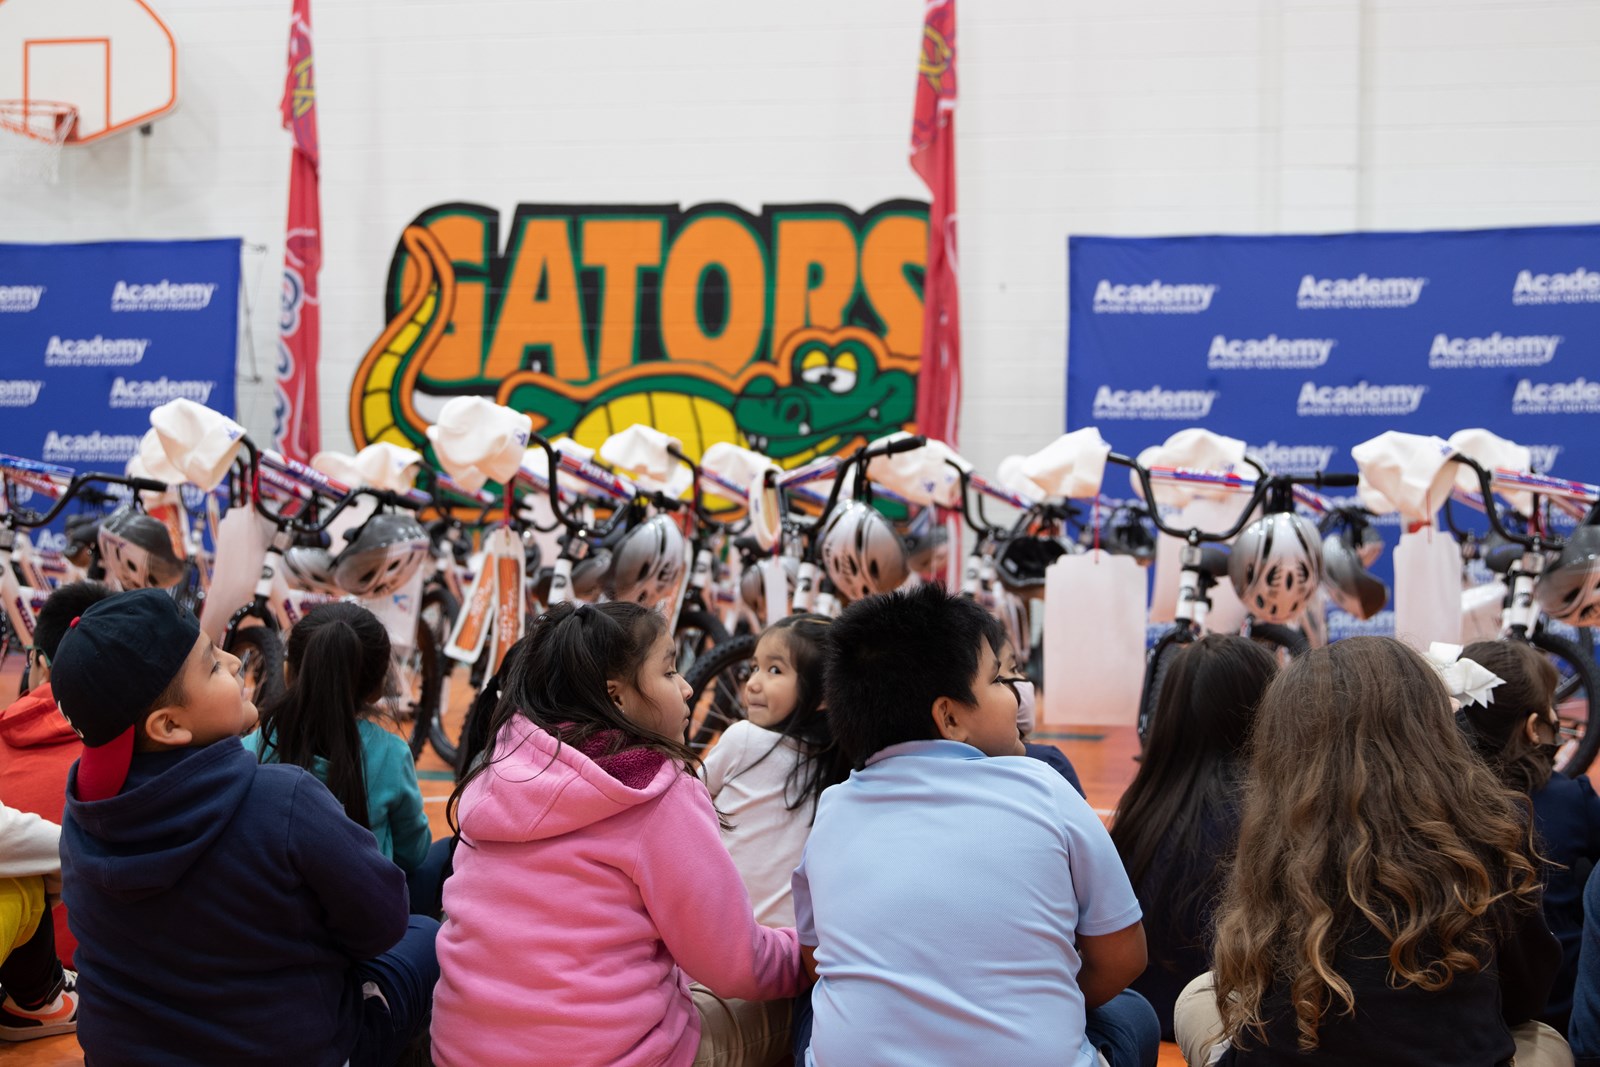 Season of Giving Continues: Academy Sports Gives 100 Bikes to